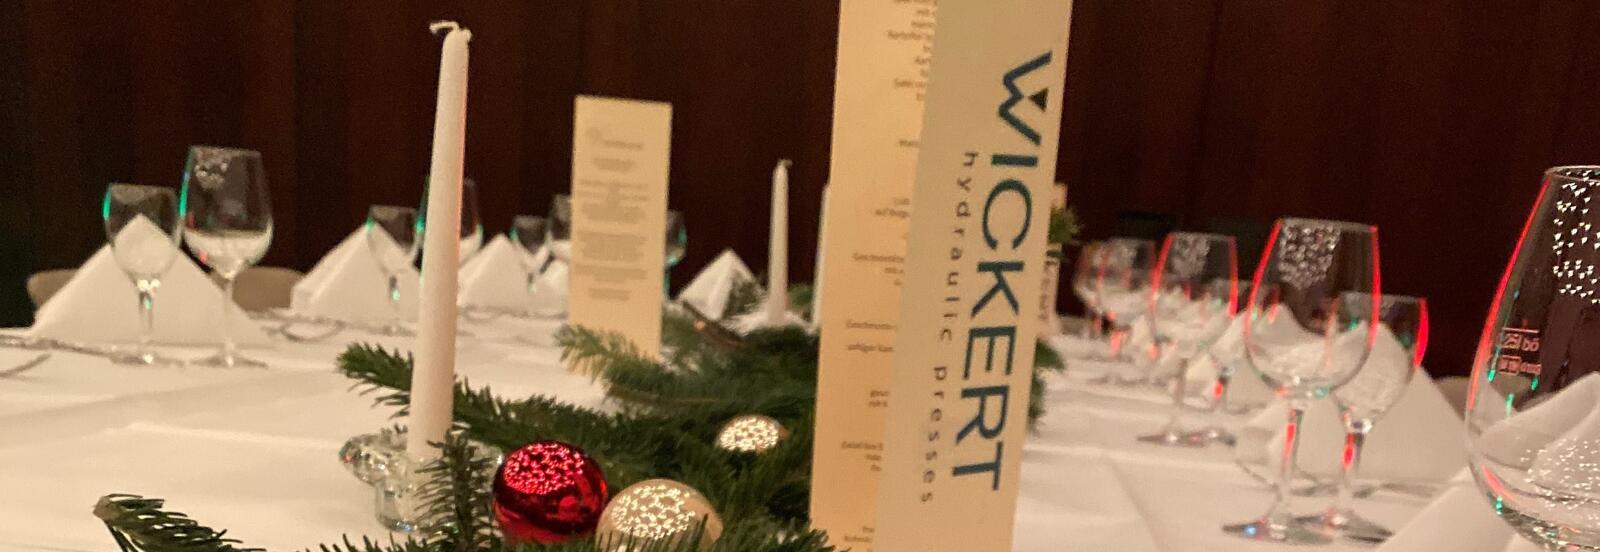 WICKERT - Christmas Party